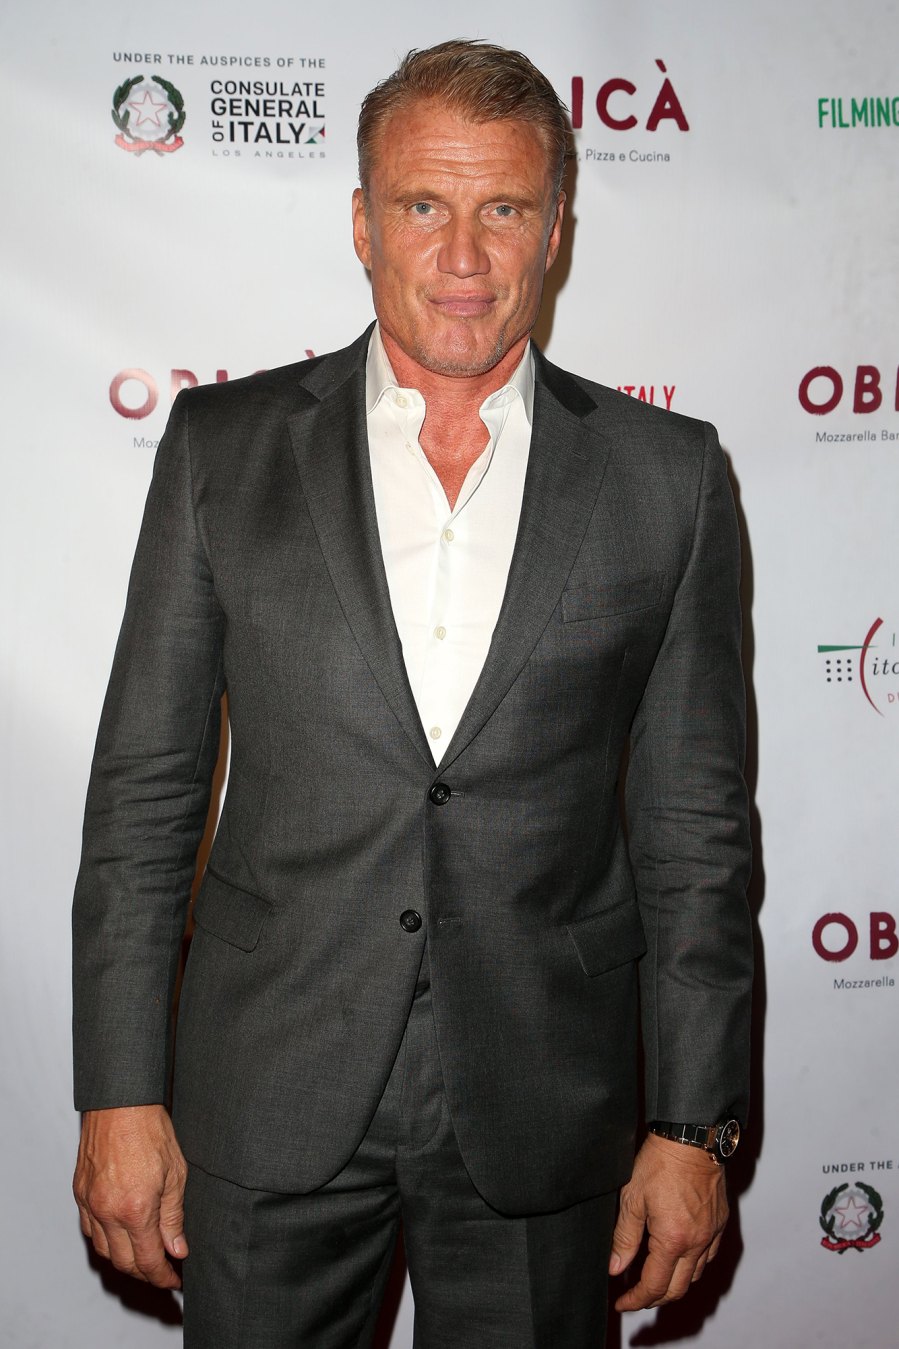 Dolph Lundgren Has Privately Battled Cancer for 8 Years